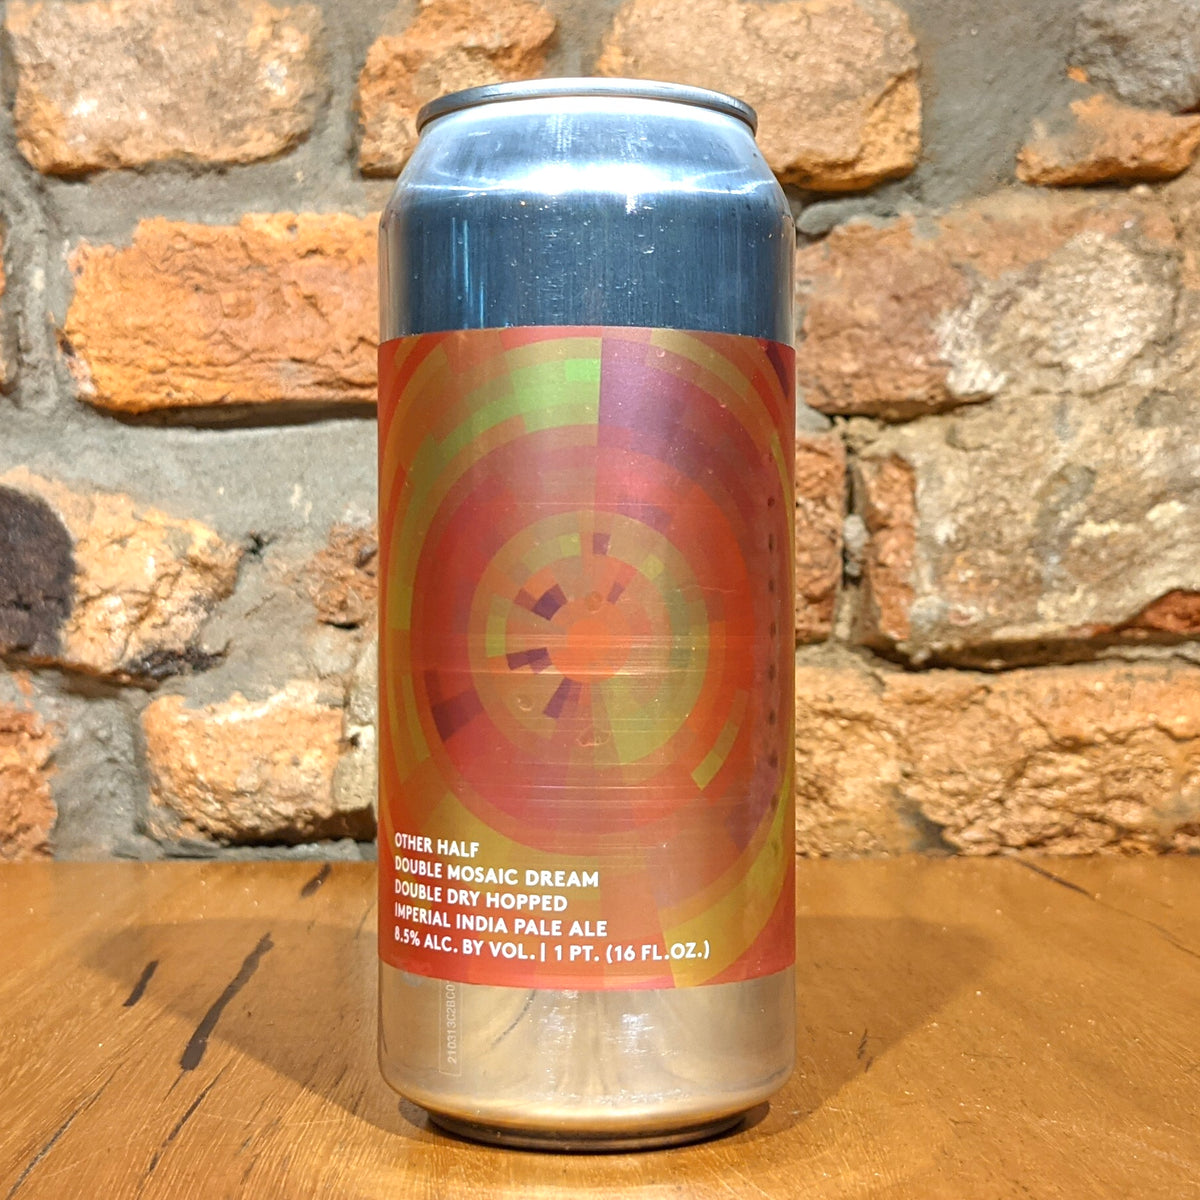 Other Half Brewing Co., DDH Double Mosaic Dream, 473ml